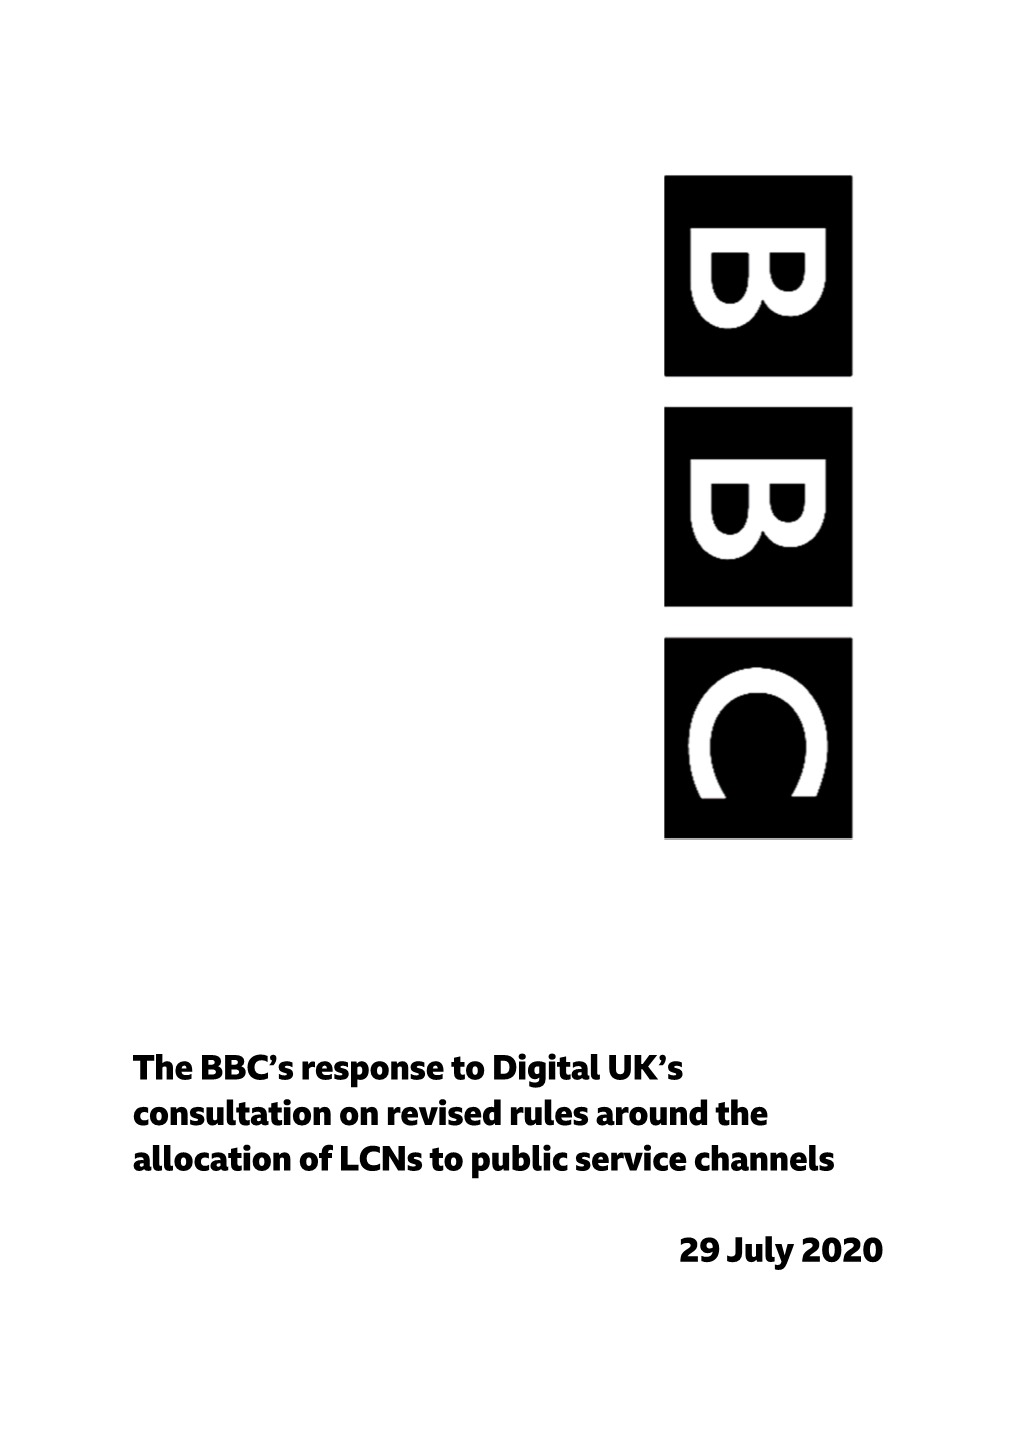 BBC’S Response to Digital UK’S Consultation on Revised Rules Around the Allocation of Lcns to Public Service Channels